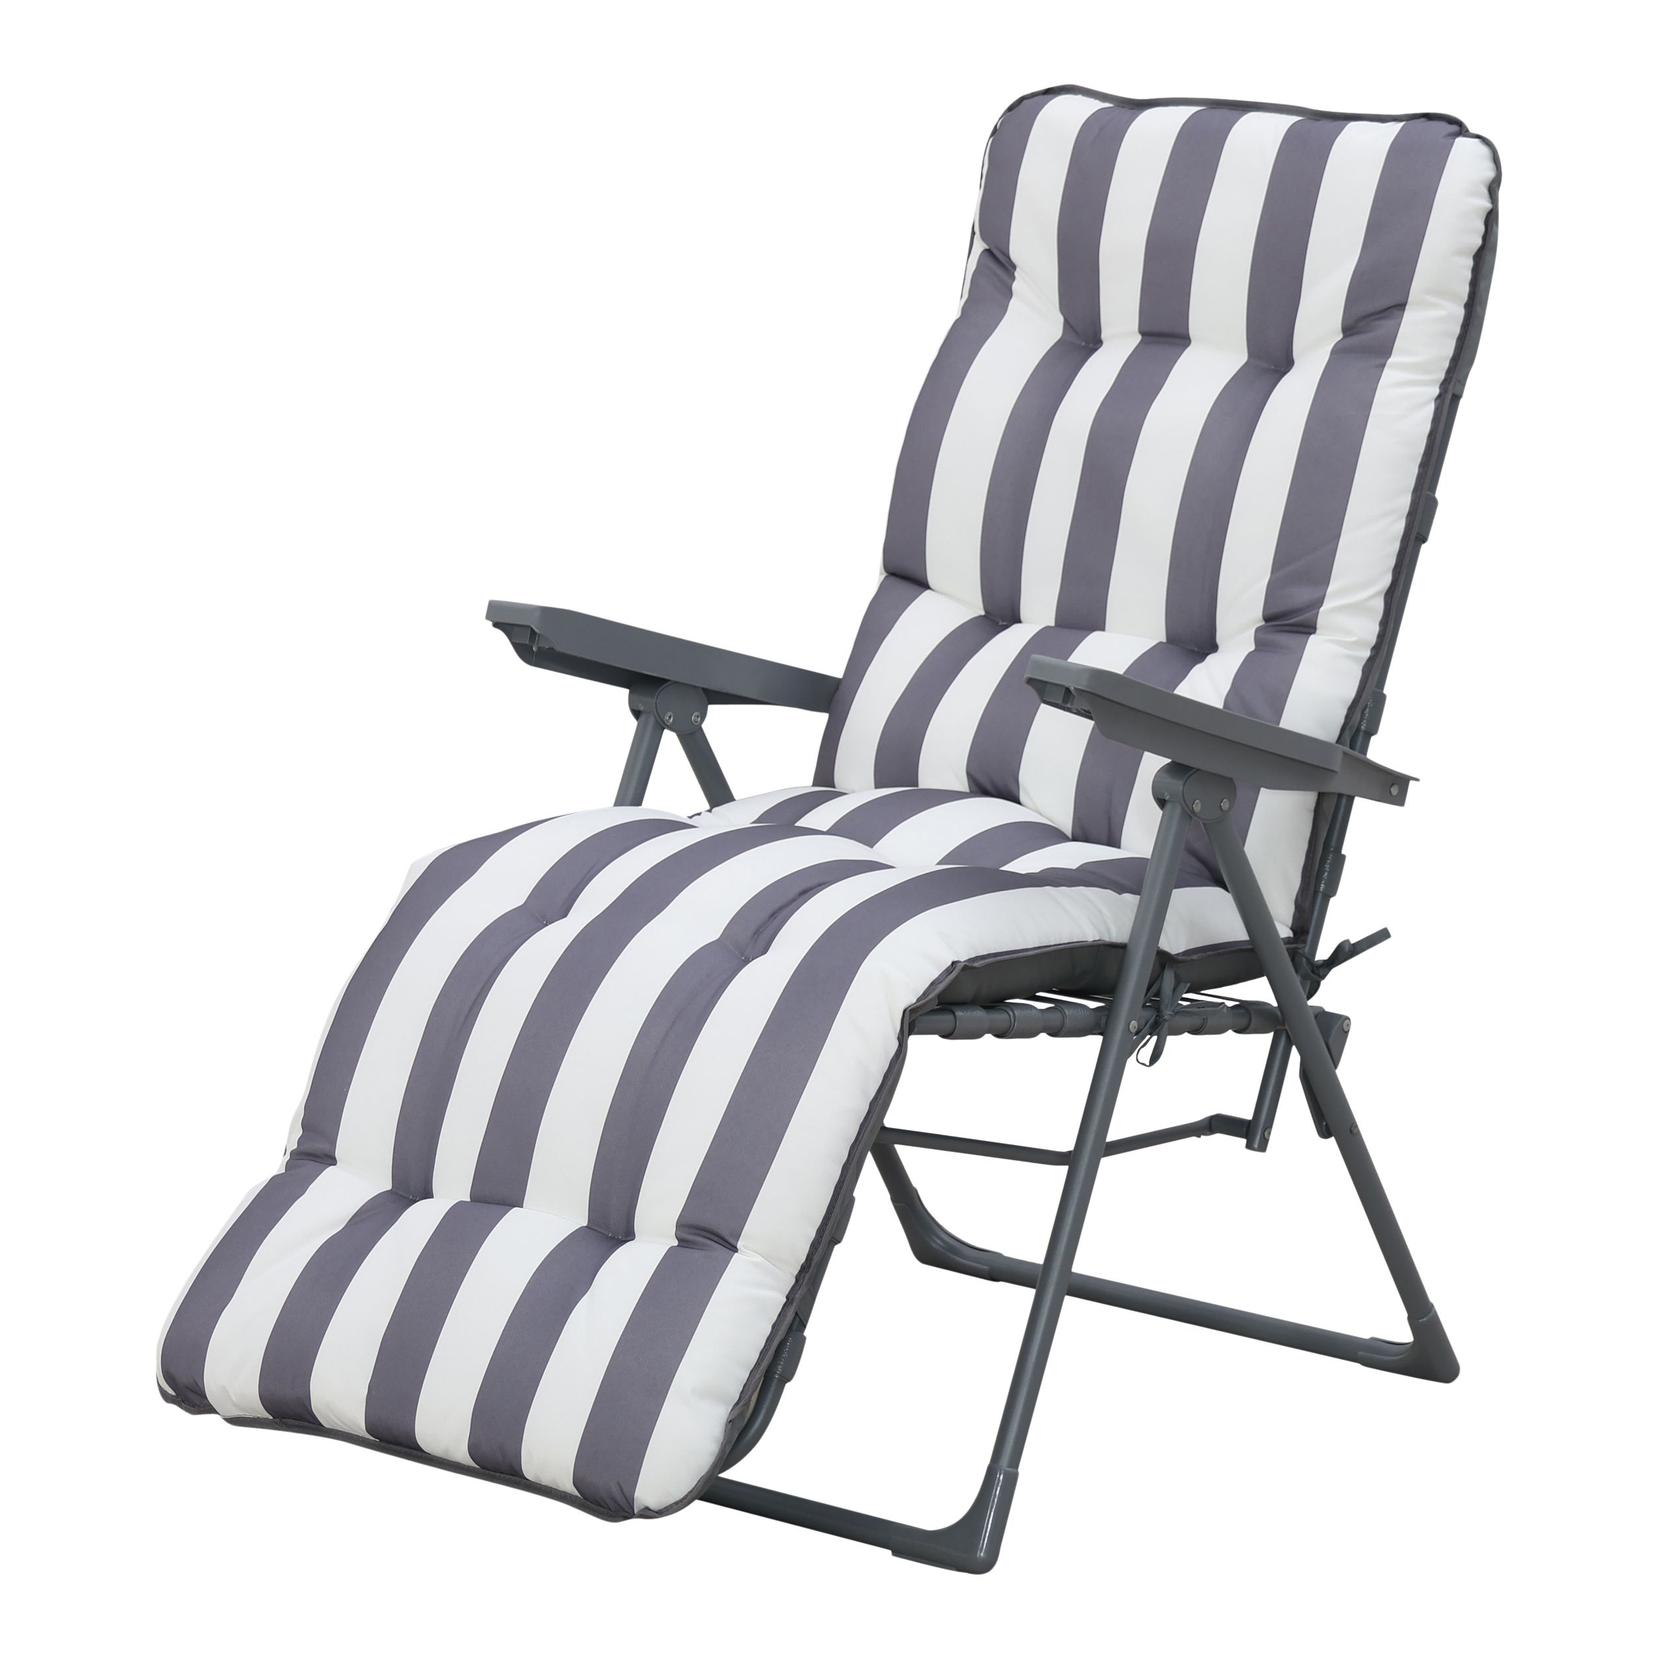 Colorado Grey Metal Sun lounger offers at £50 in B&Q